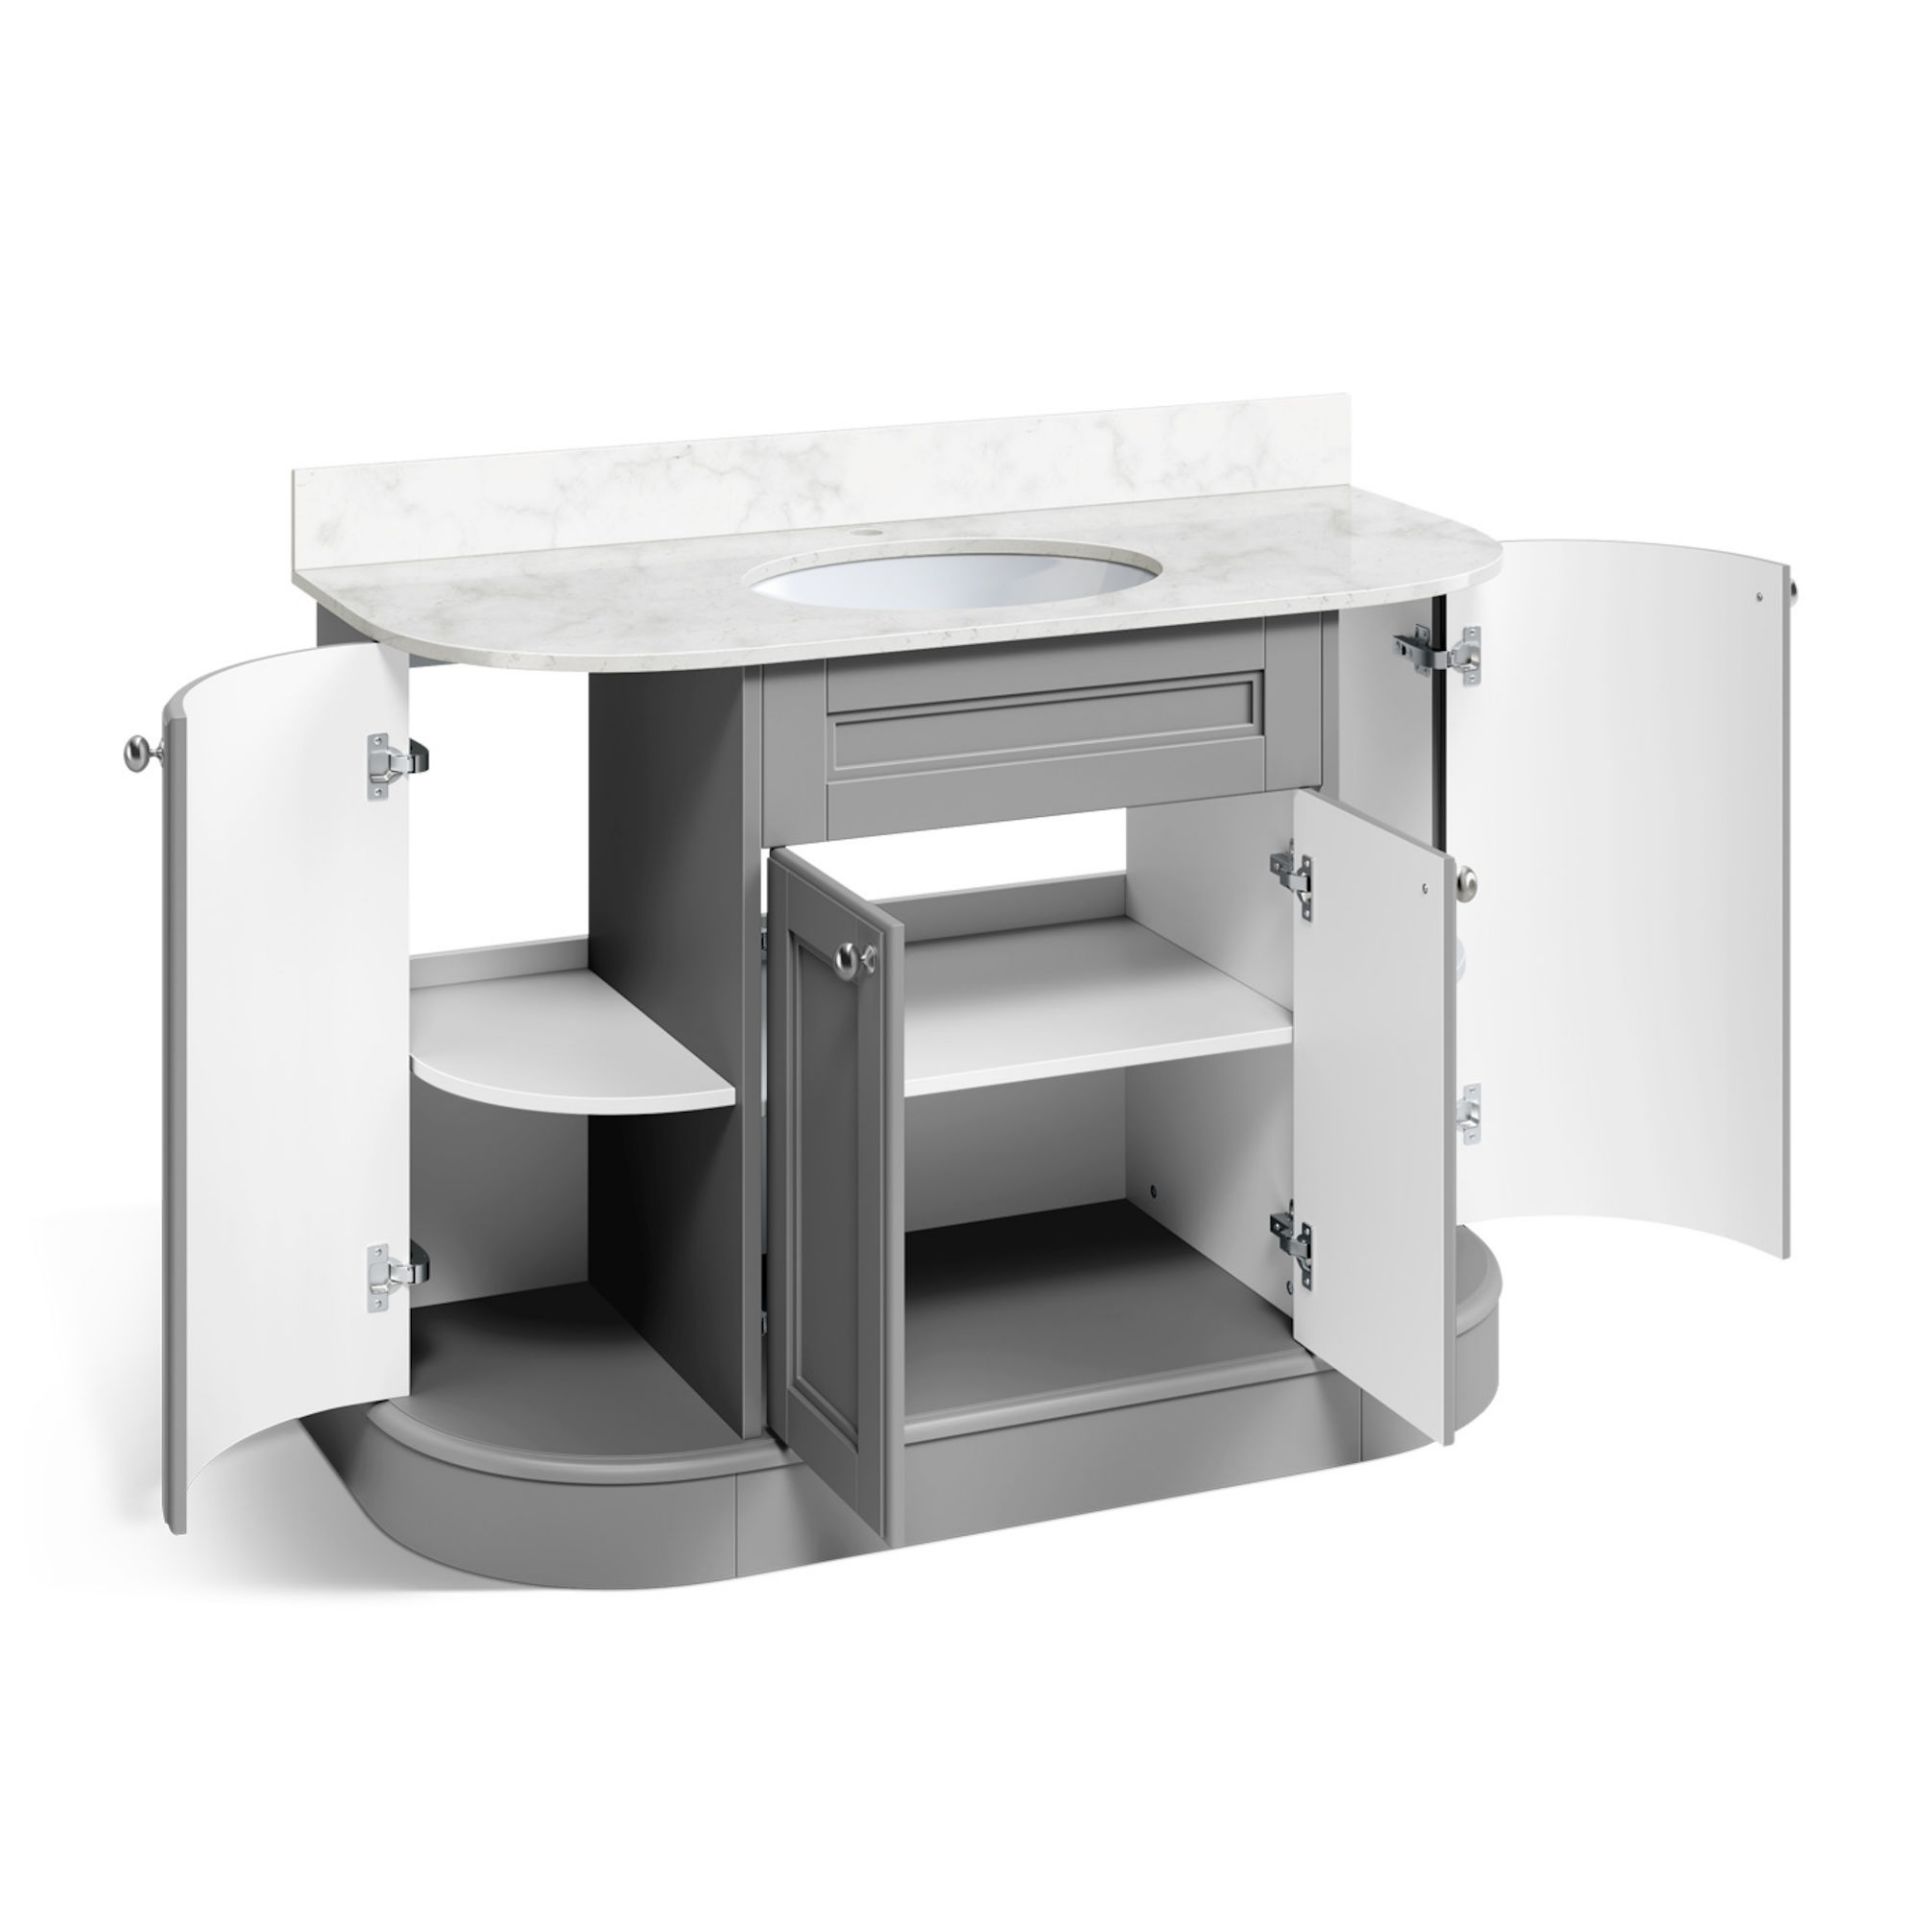 NEW & BOXED 1200mm York Earl Grey Vanity Unit. RRP £3,499.Comes complete with countertop and ... - Image 3 of 5